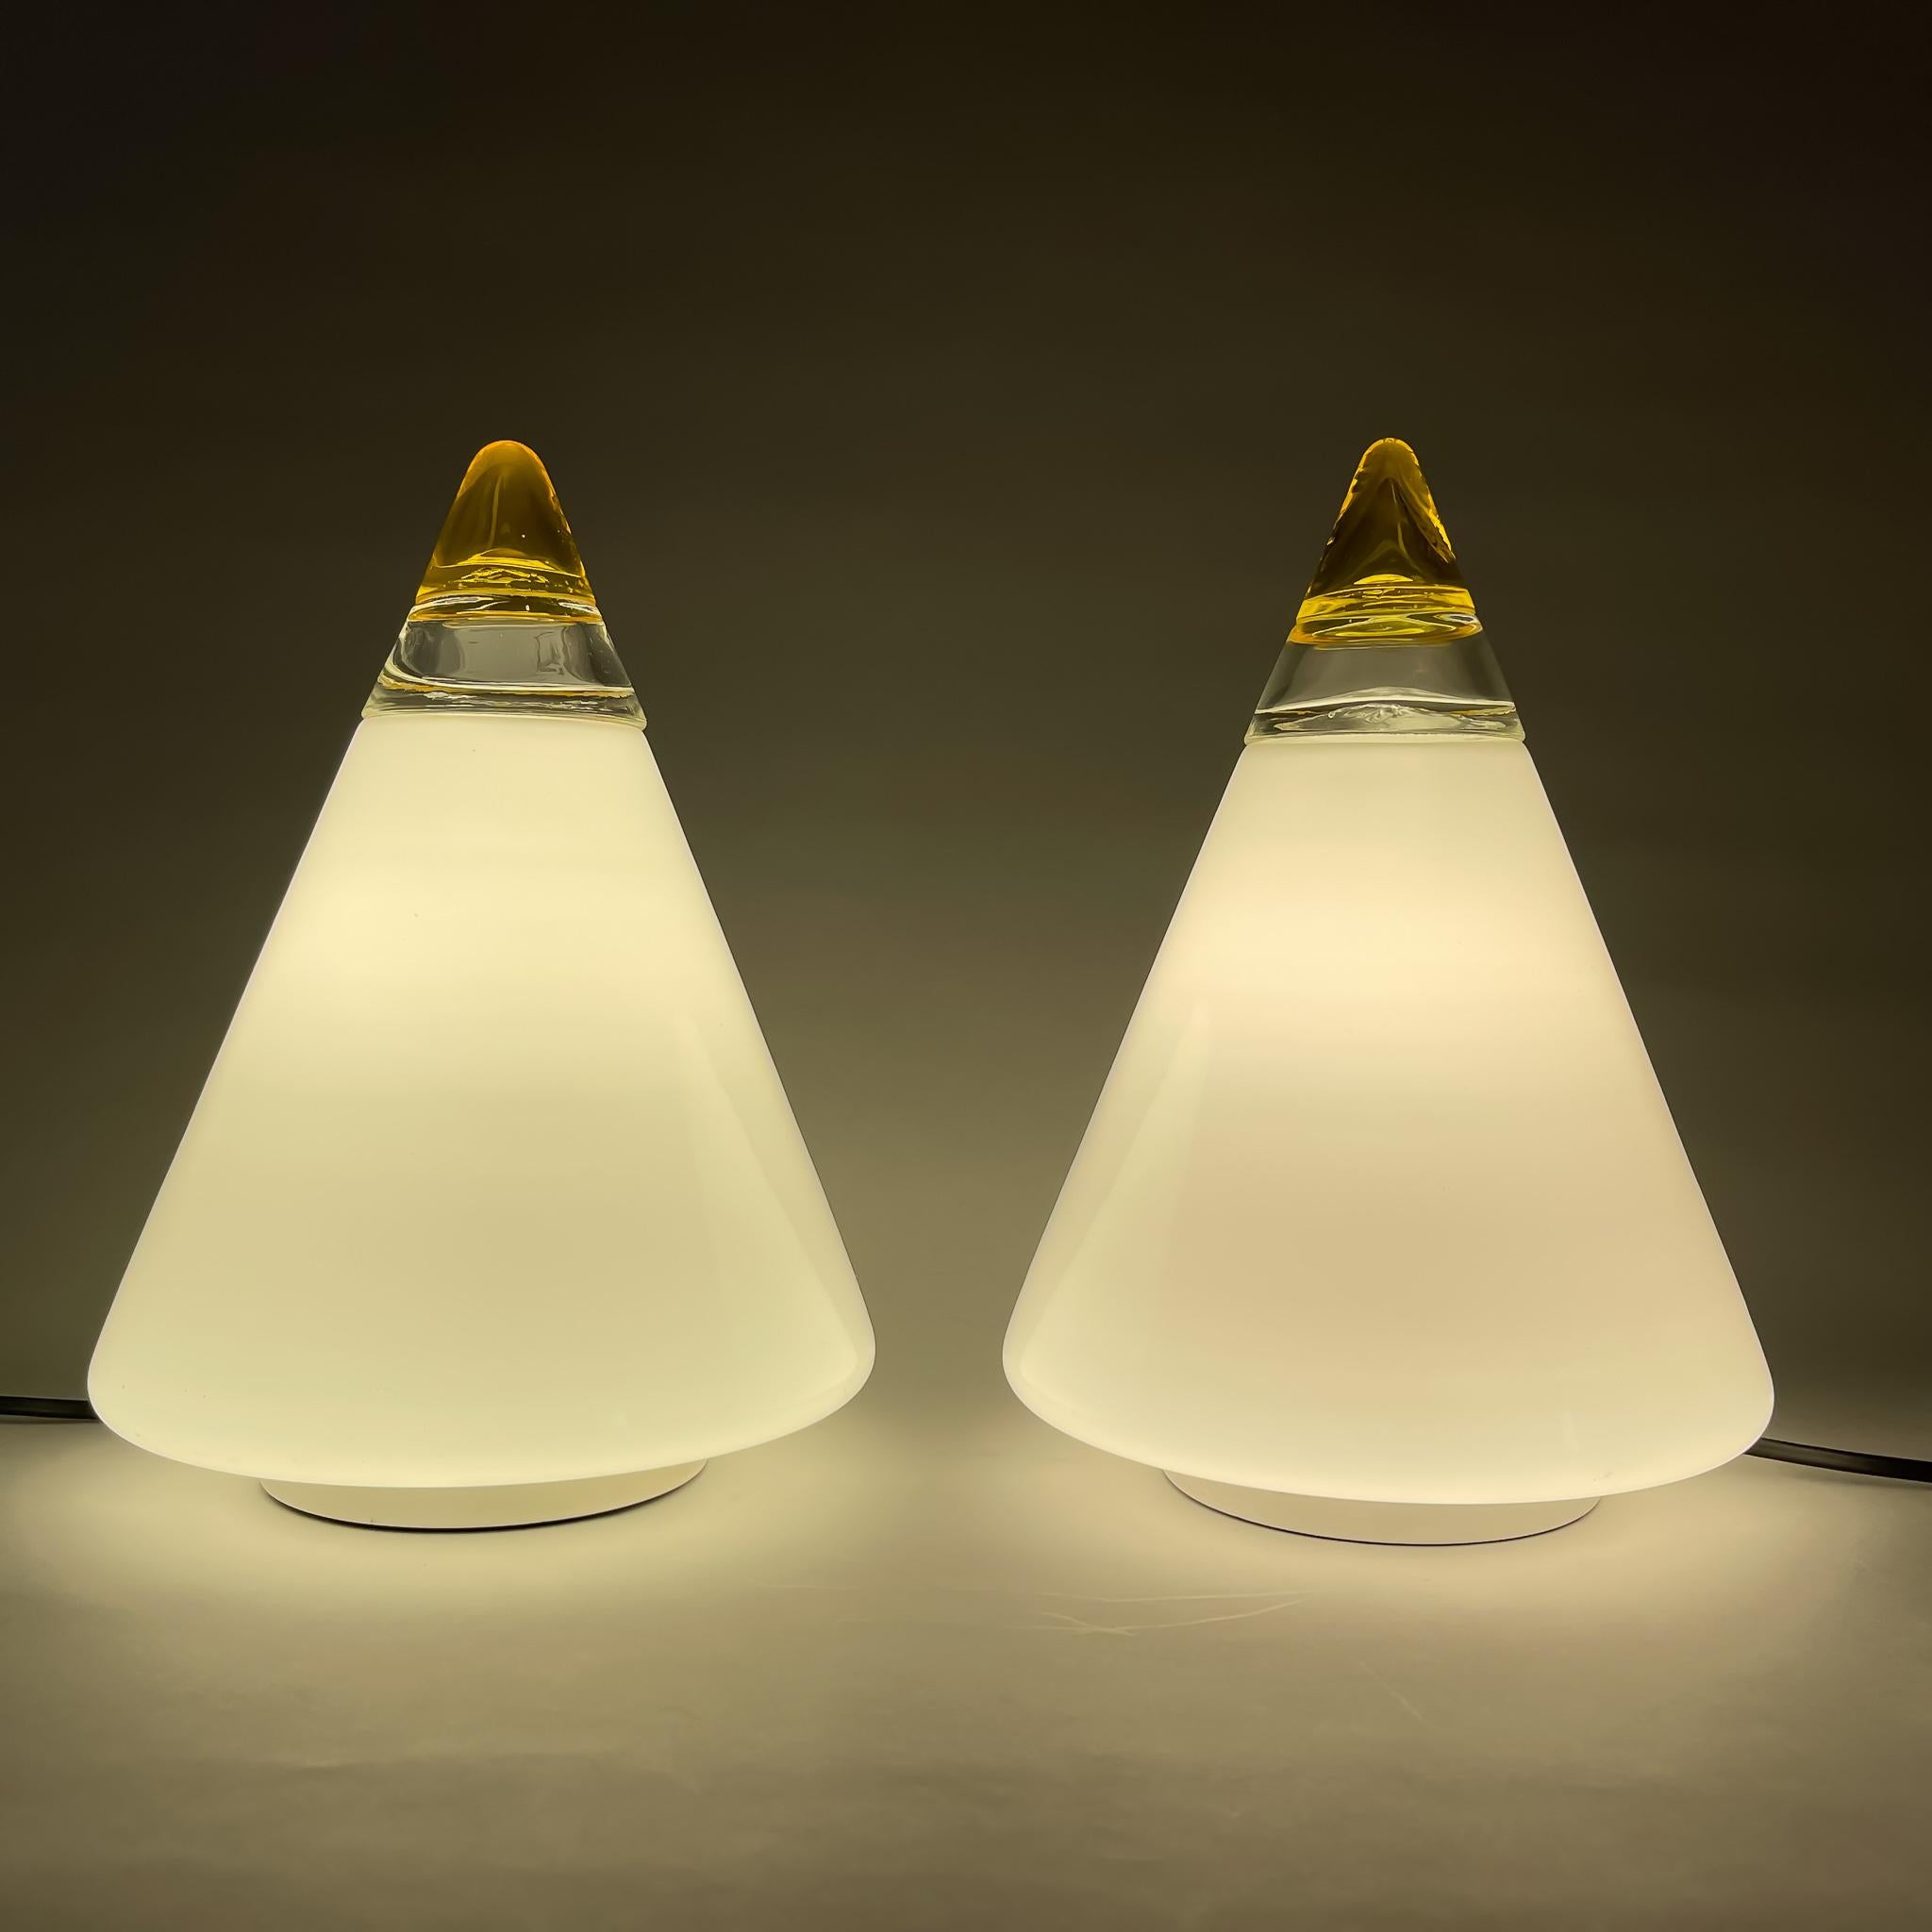 Murano Glass Pair of Vetri Murano Table Lamps by Giusto Toso, 1970's For Sale